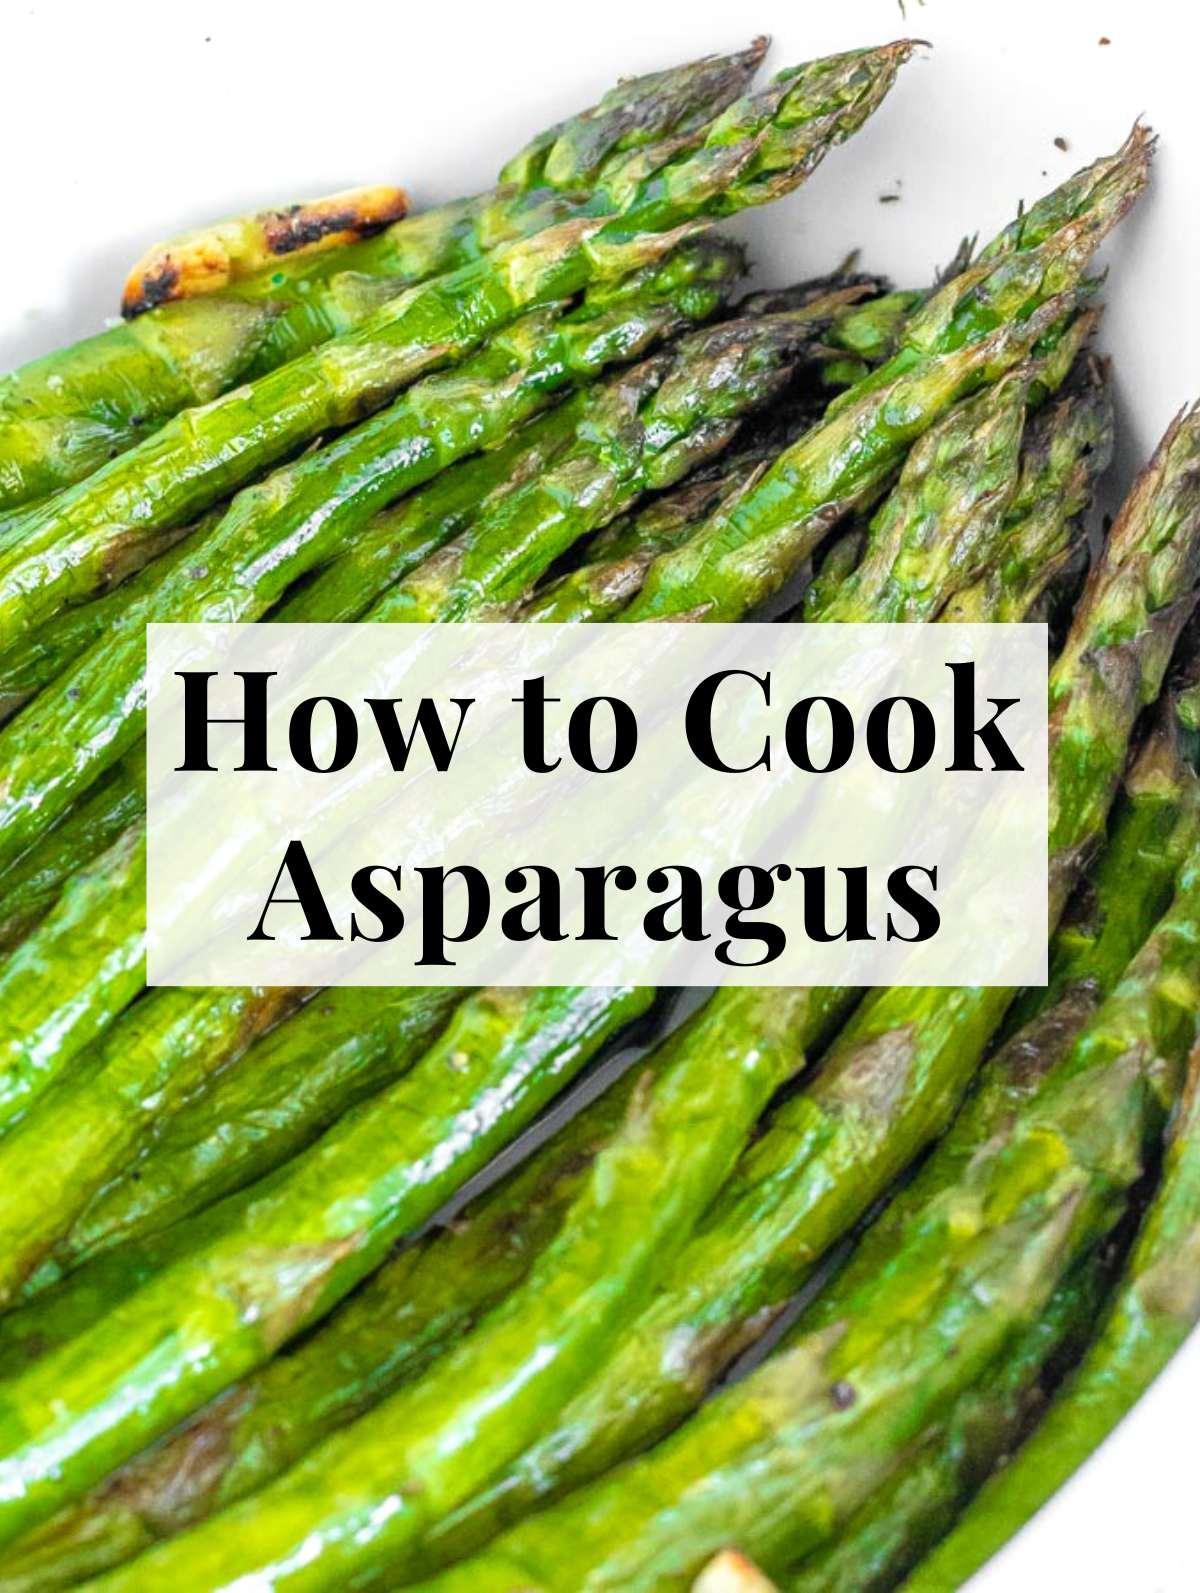 how to cook asparagus including side dishes and main meals